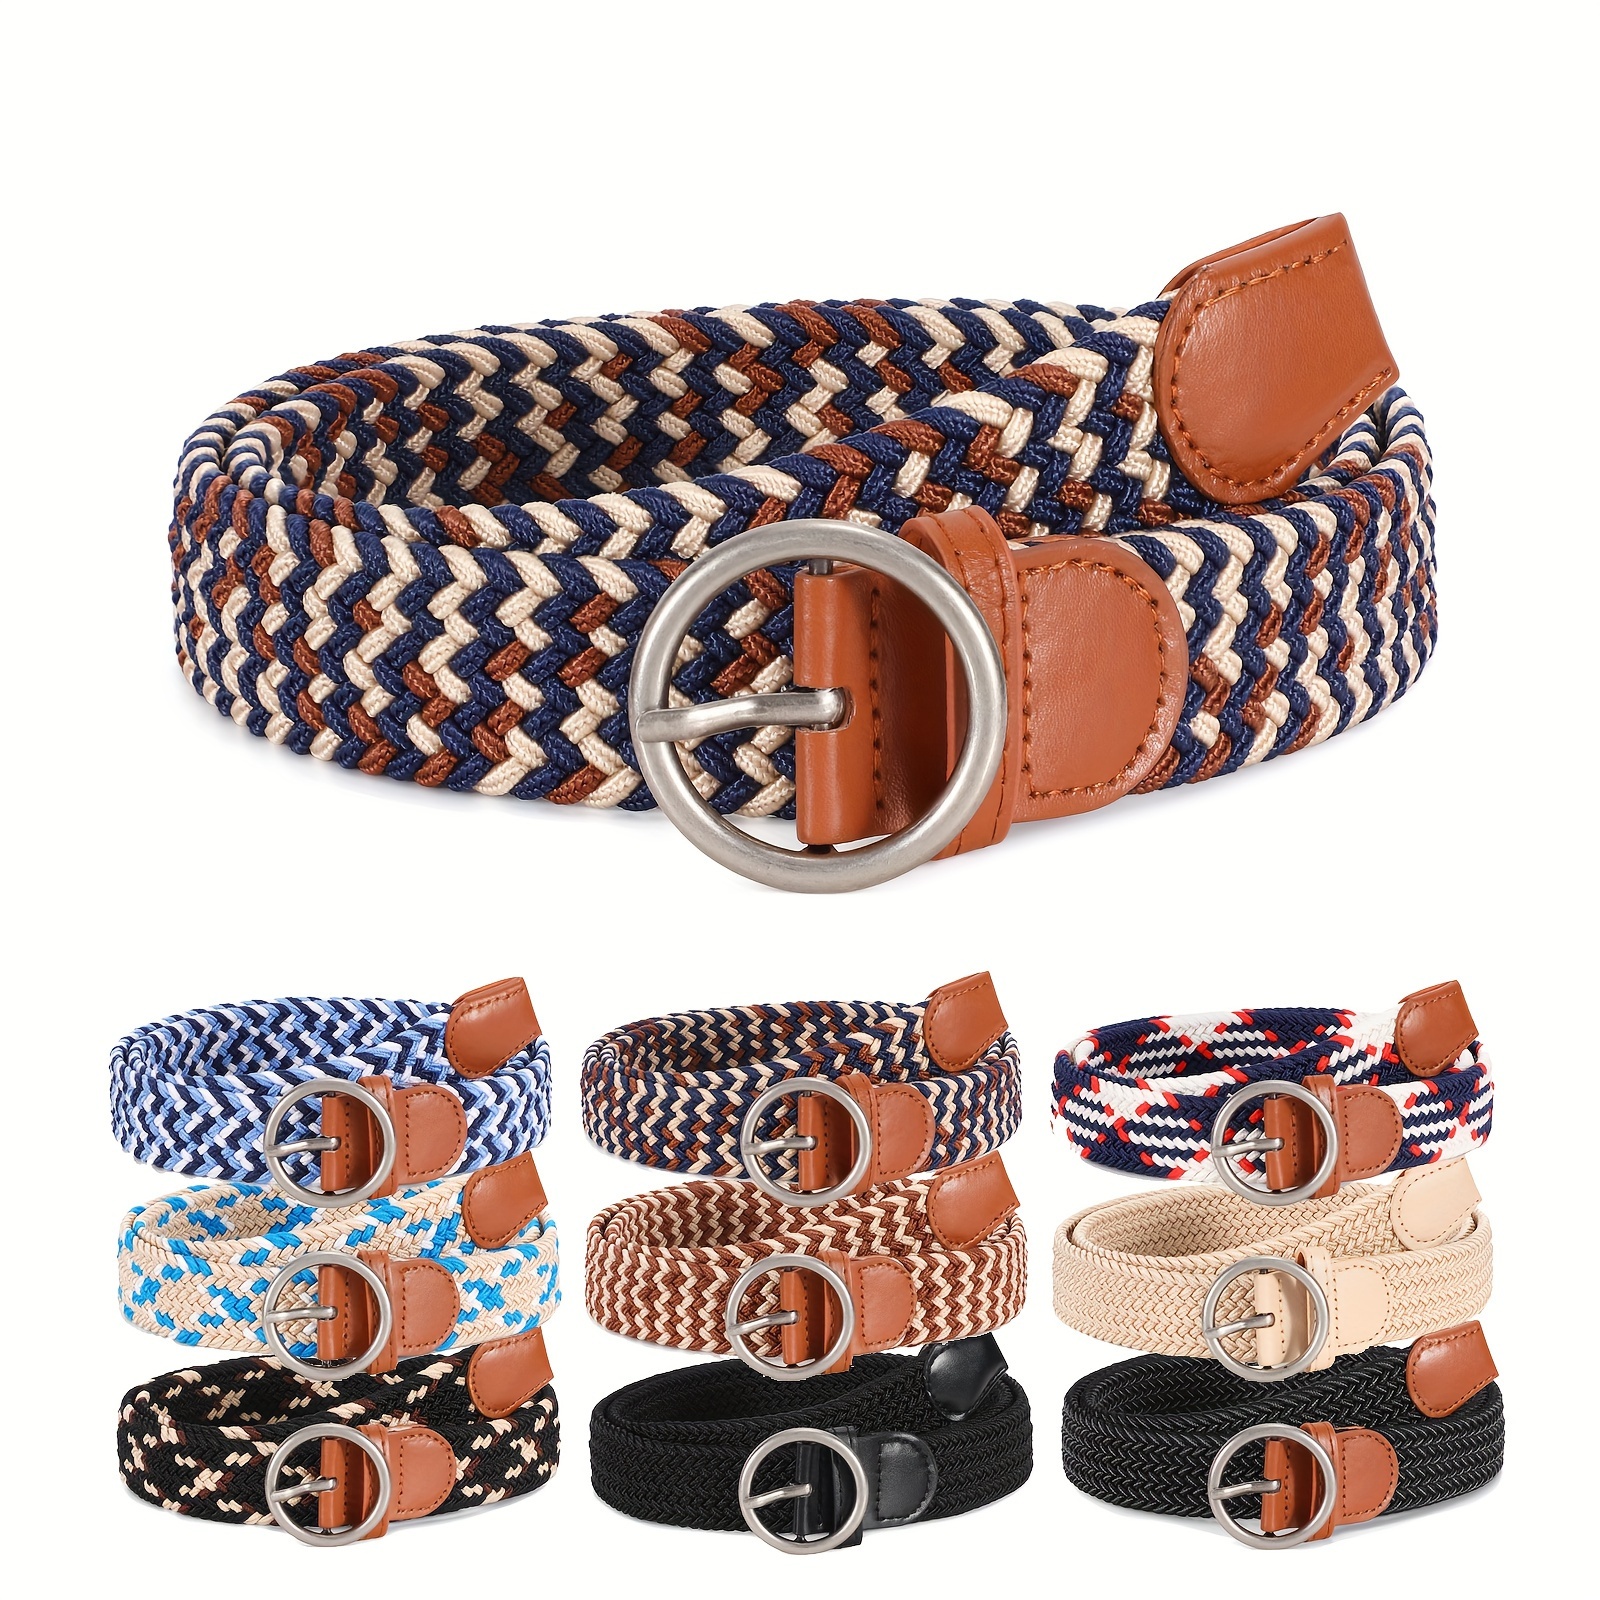 XZQTIVE Braided Belt Stretch Belt for Men and Women Multicolored Woven Golf  Belt Elastic Jean Belts (08 Style, Fit Waist 24-28in) at  Men's  Clothing store